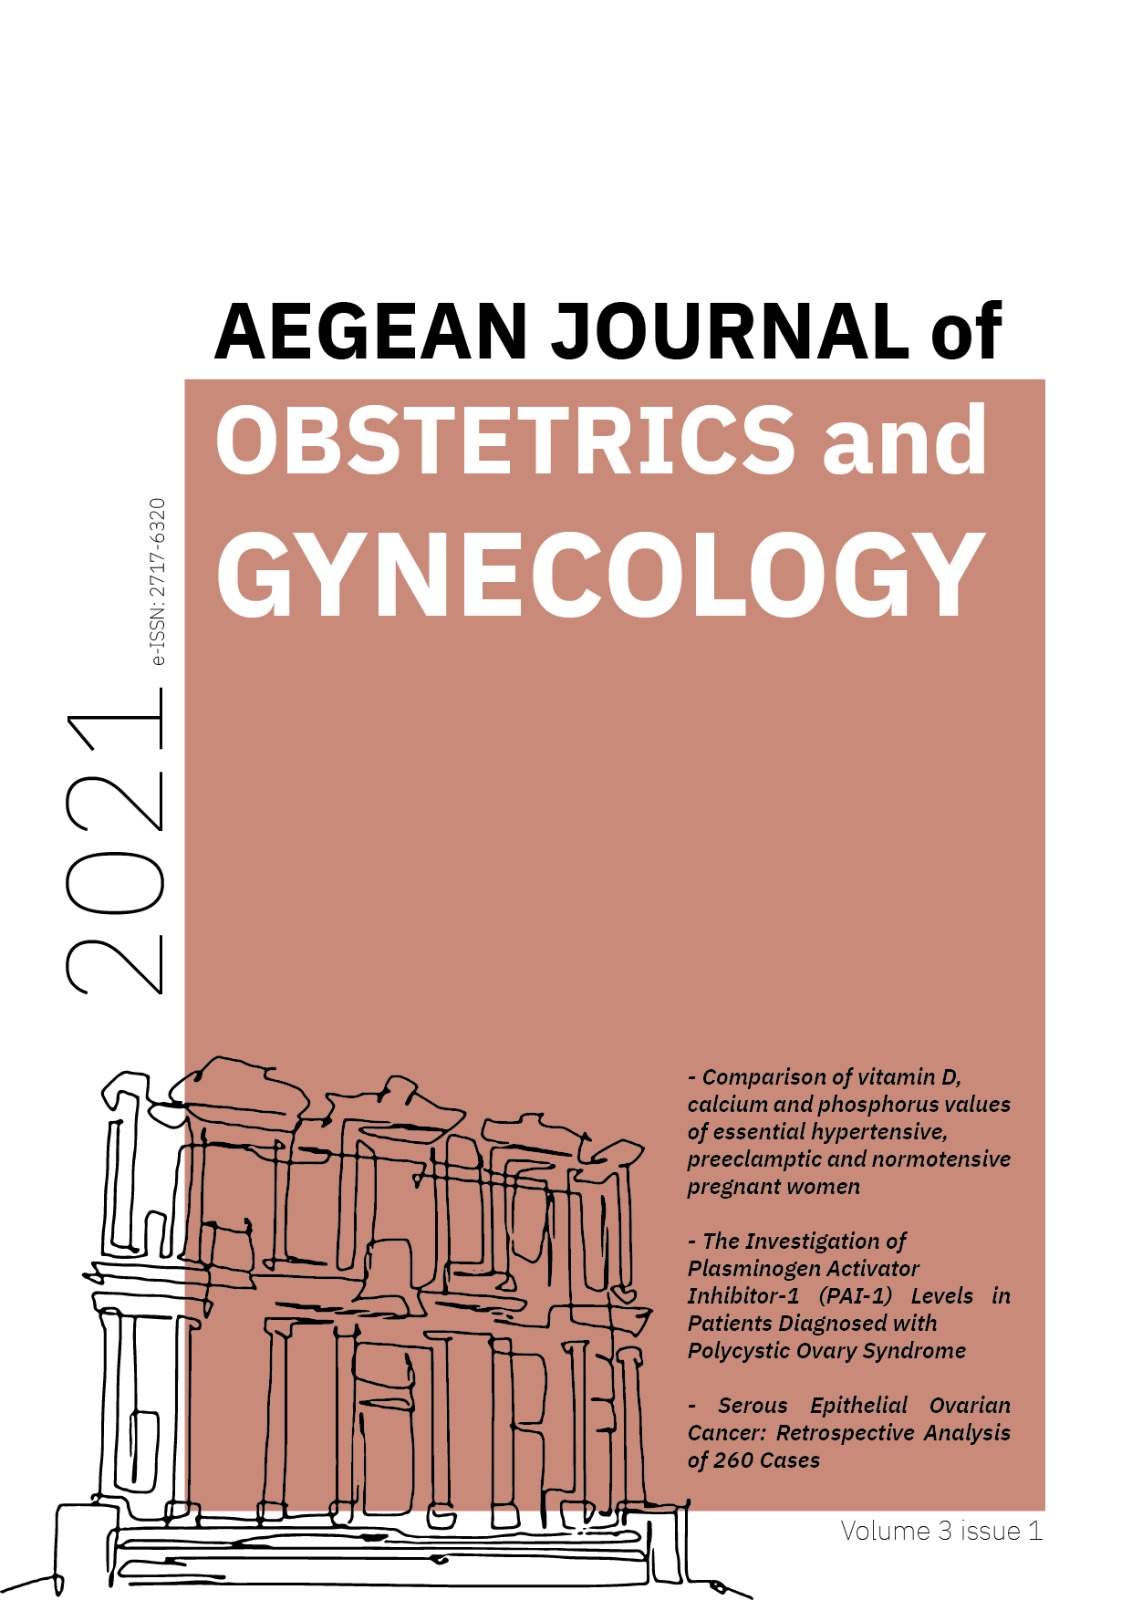 					View Vol. 3 No. 1 (2021): Aegean Journal of Obstetrics and Gynecology
				